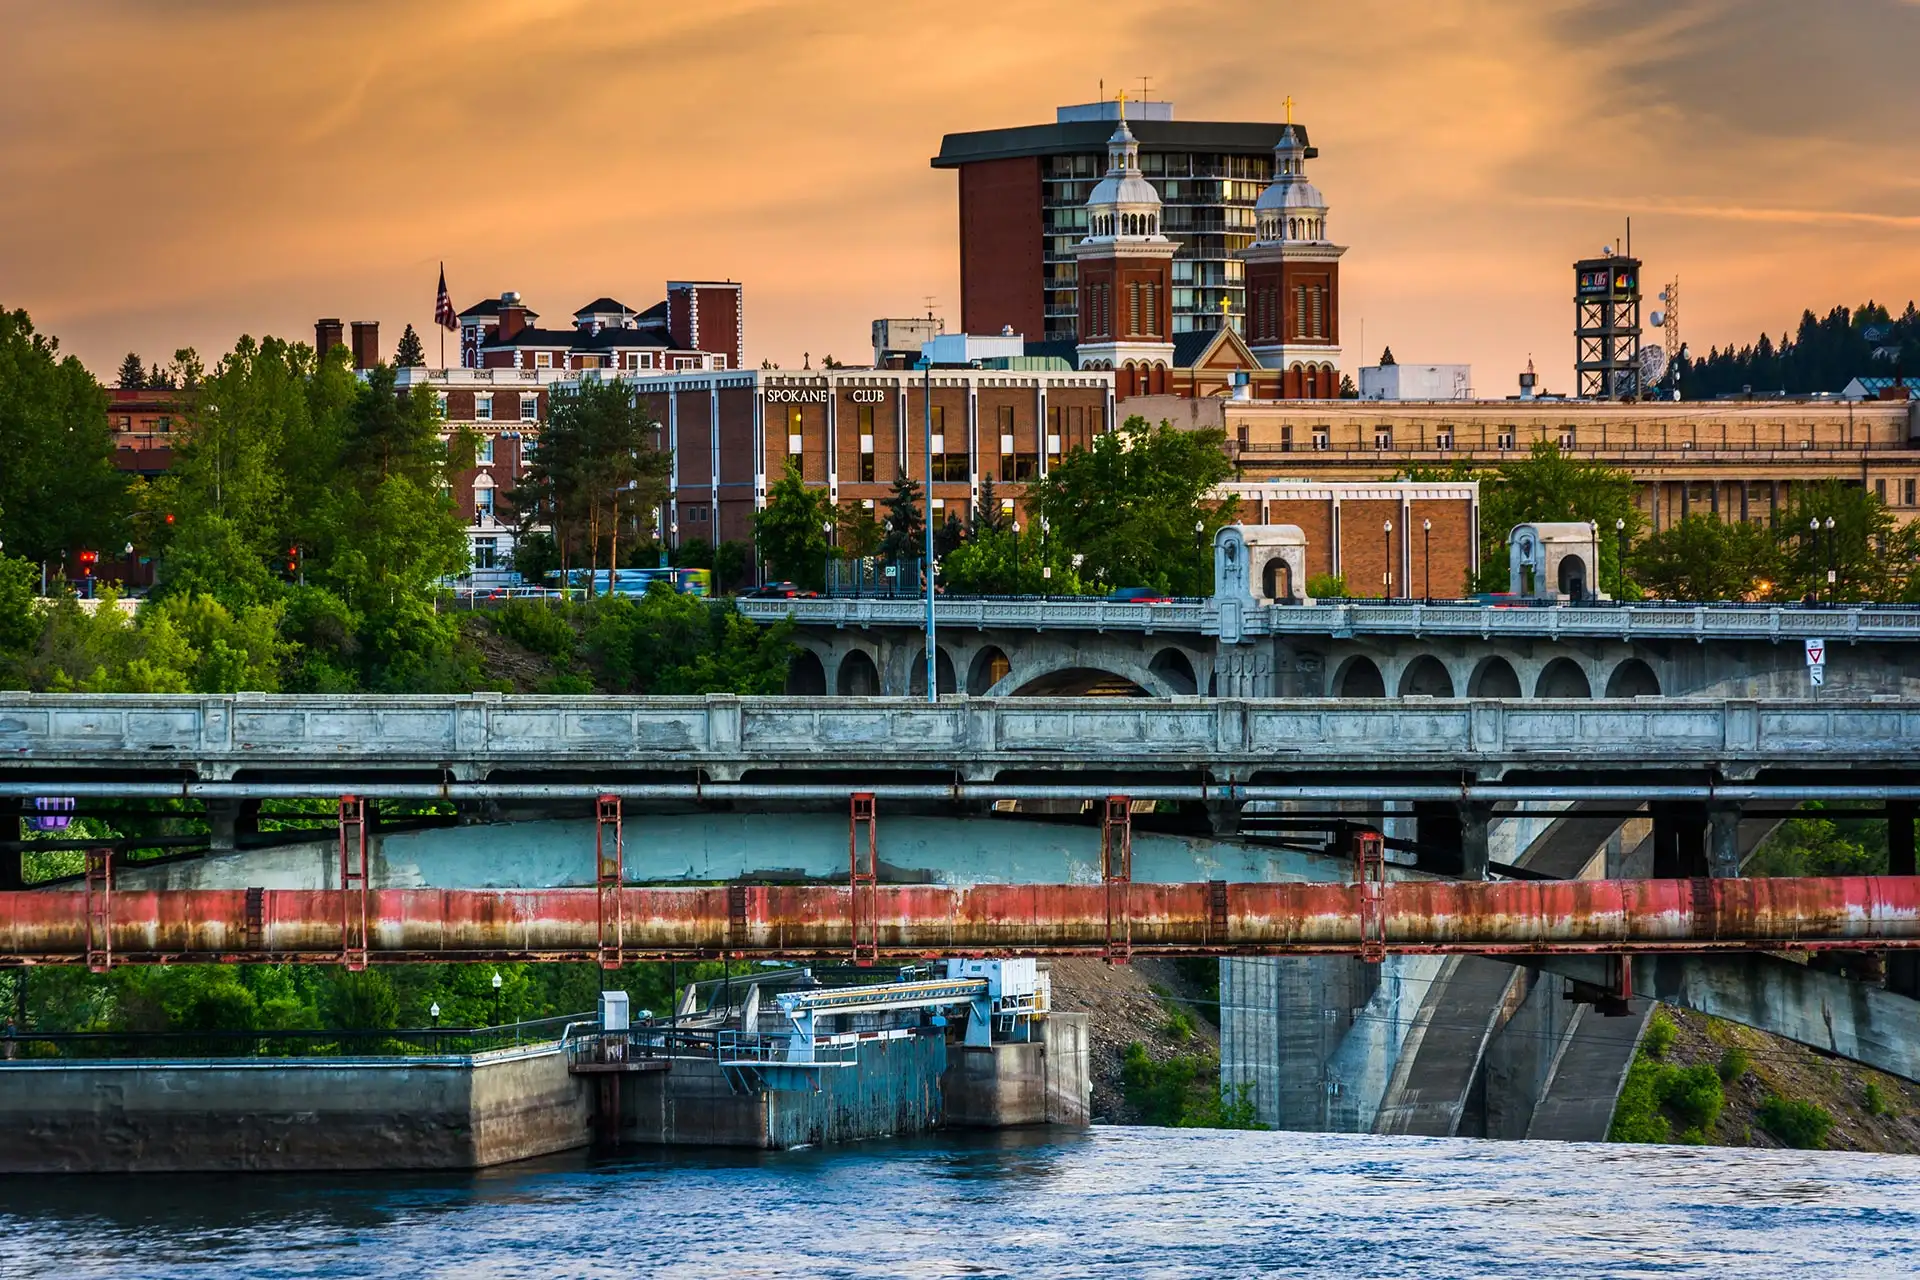 Bridges over the Spokane River and buildings at sunset in Washington